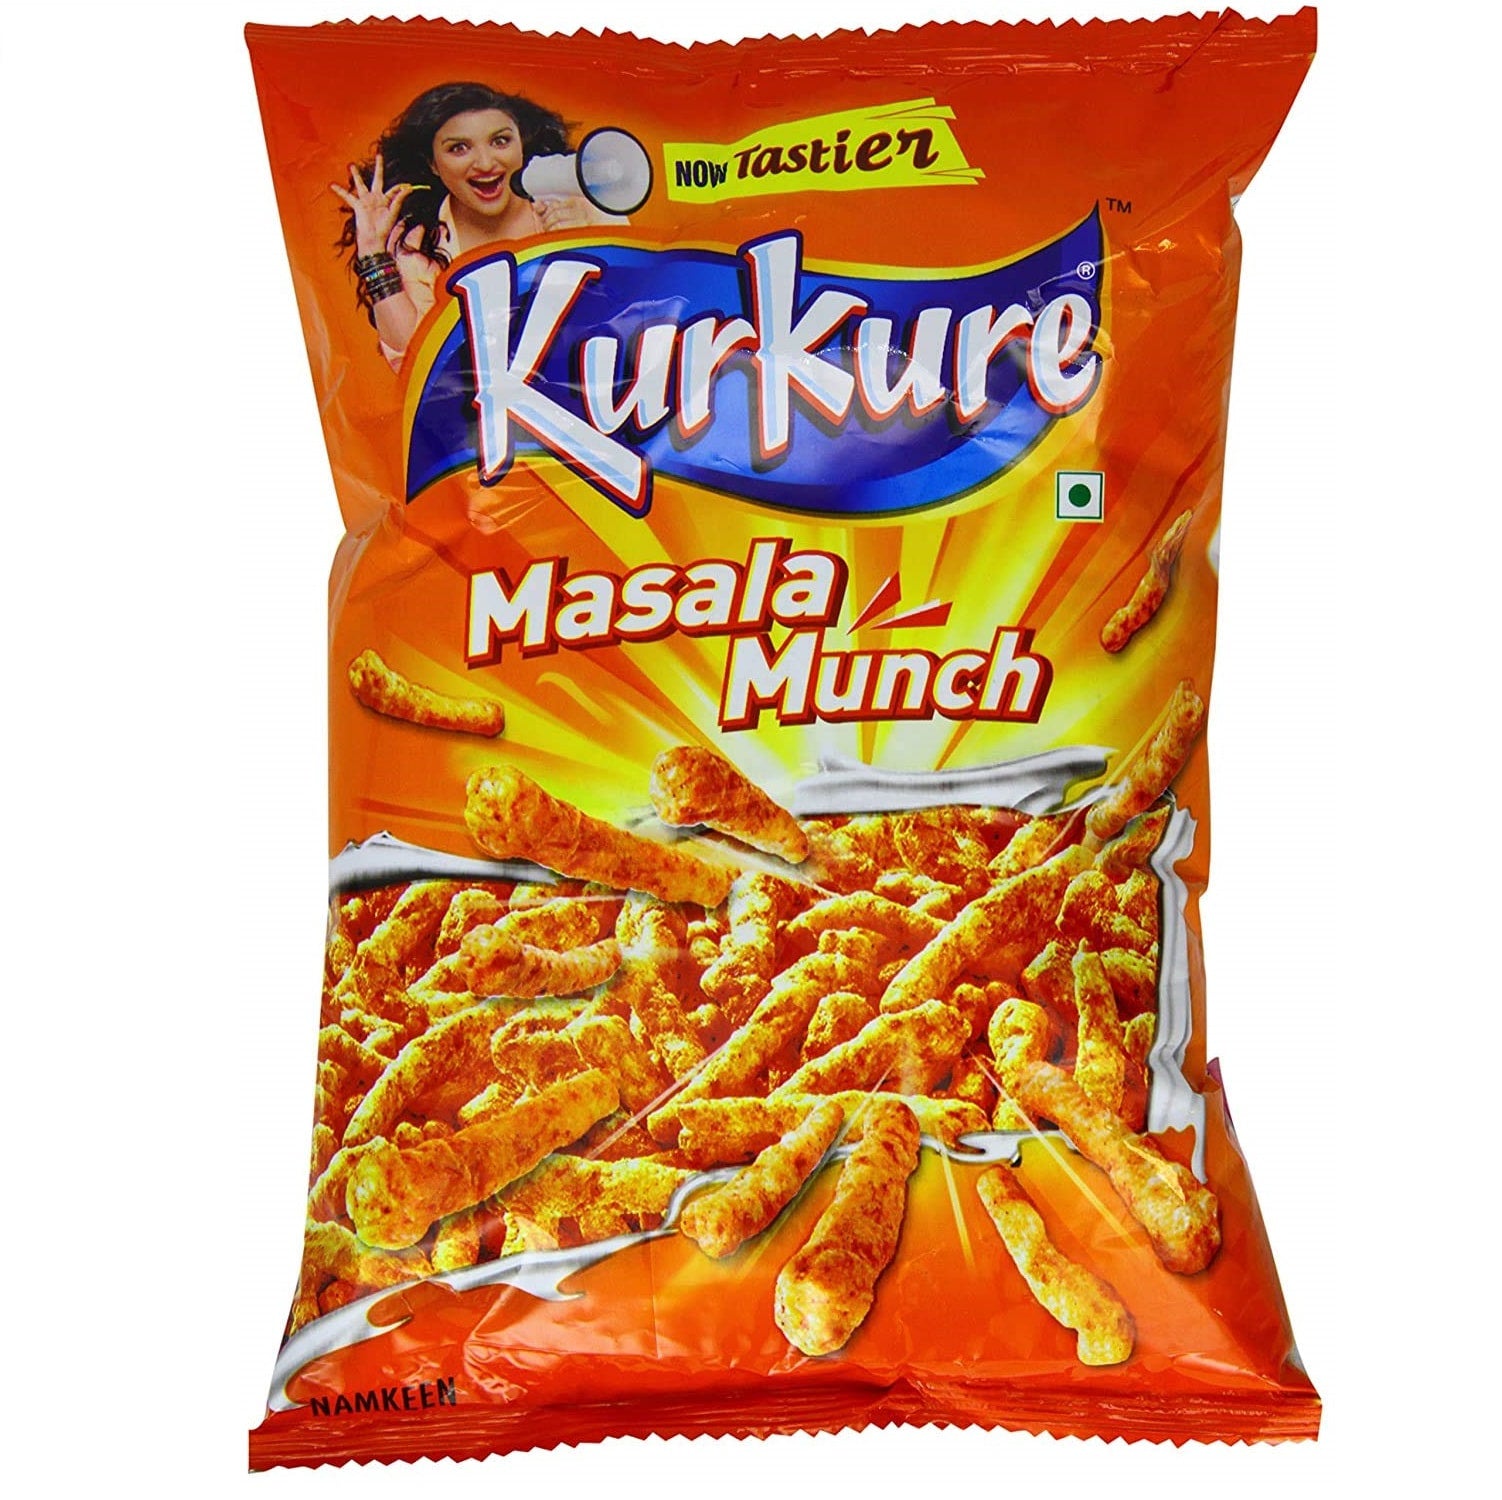 M.U.N.C.H: What does MUNCH mean in Miscellaneous?munching